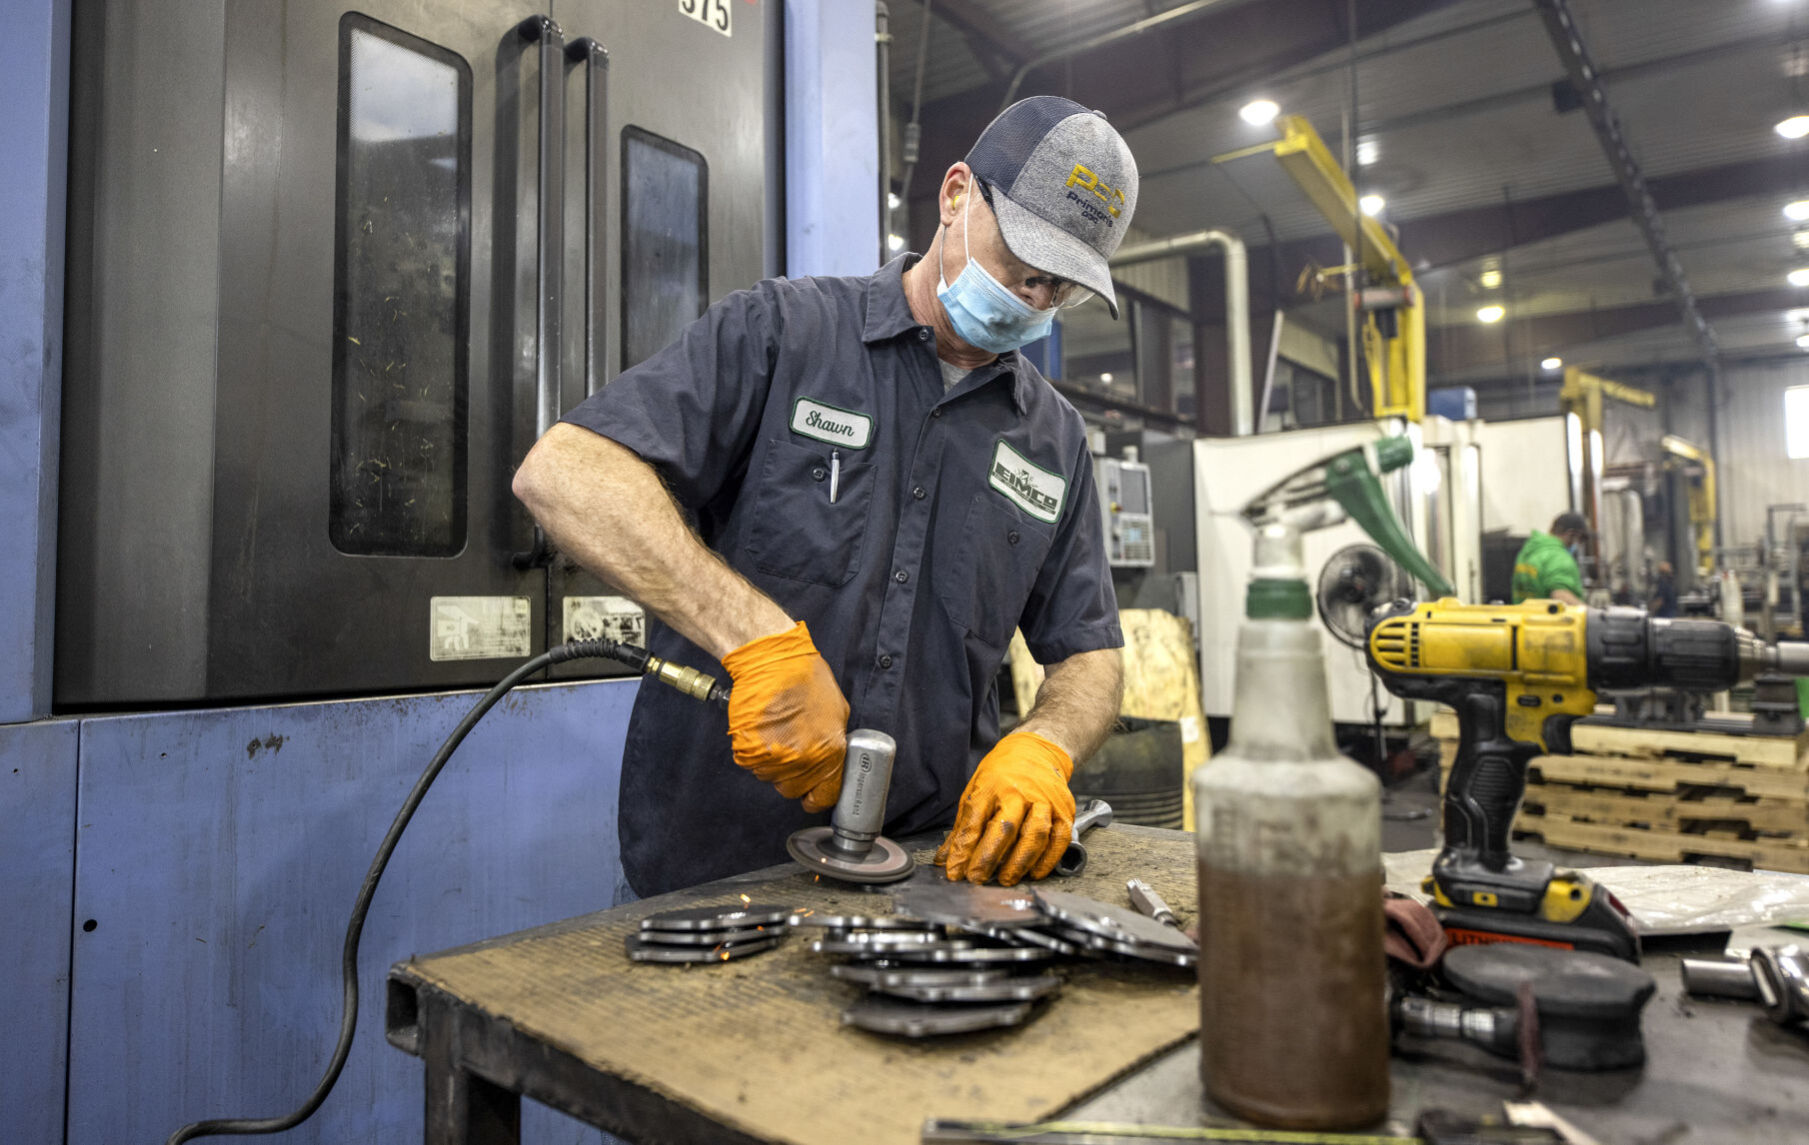 Shawn Burchard, an employee of EIMCO, grinds parts in the Farley, Iowa, plant. PHOTO CREDIT: Jacob Fiscus